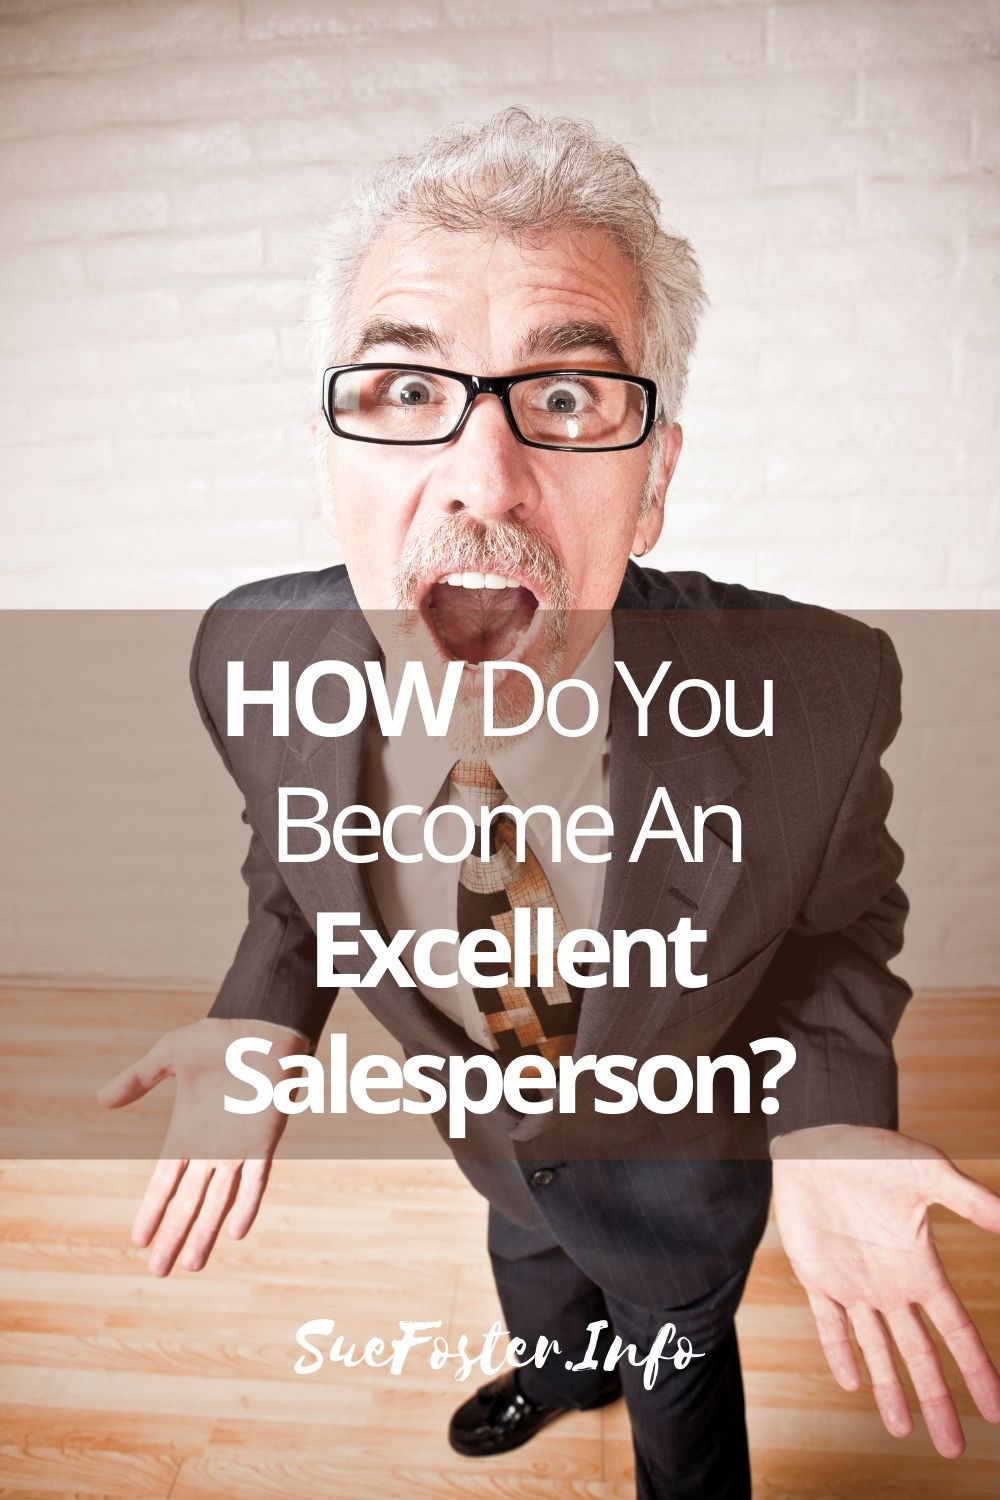 Let's look at some ways how a good salesperson can become a great one.